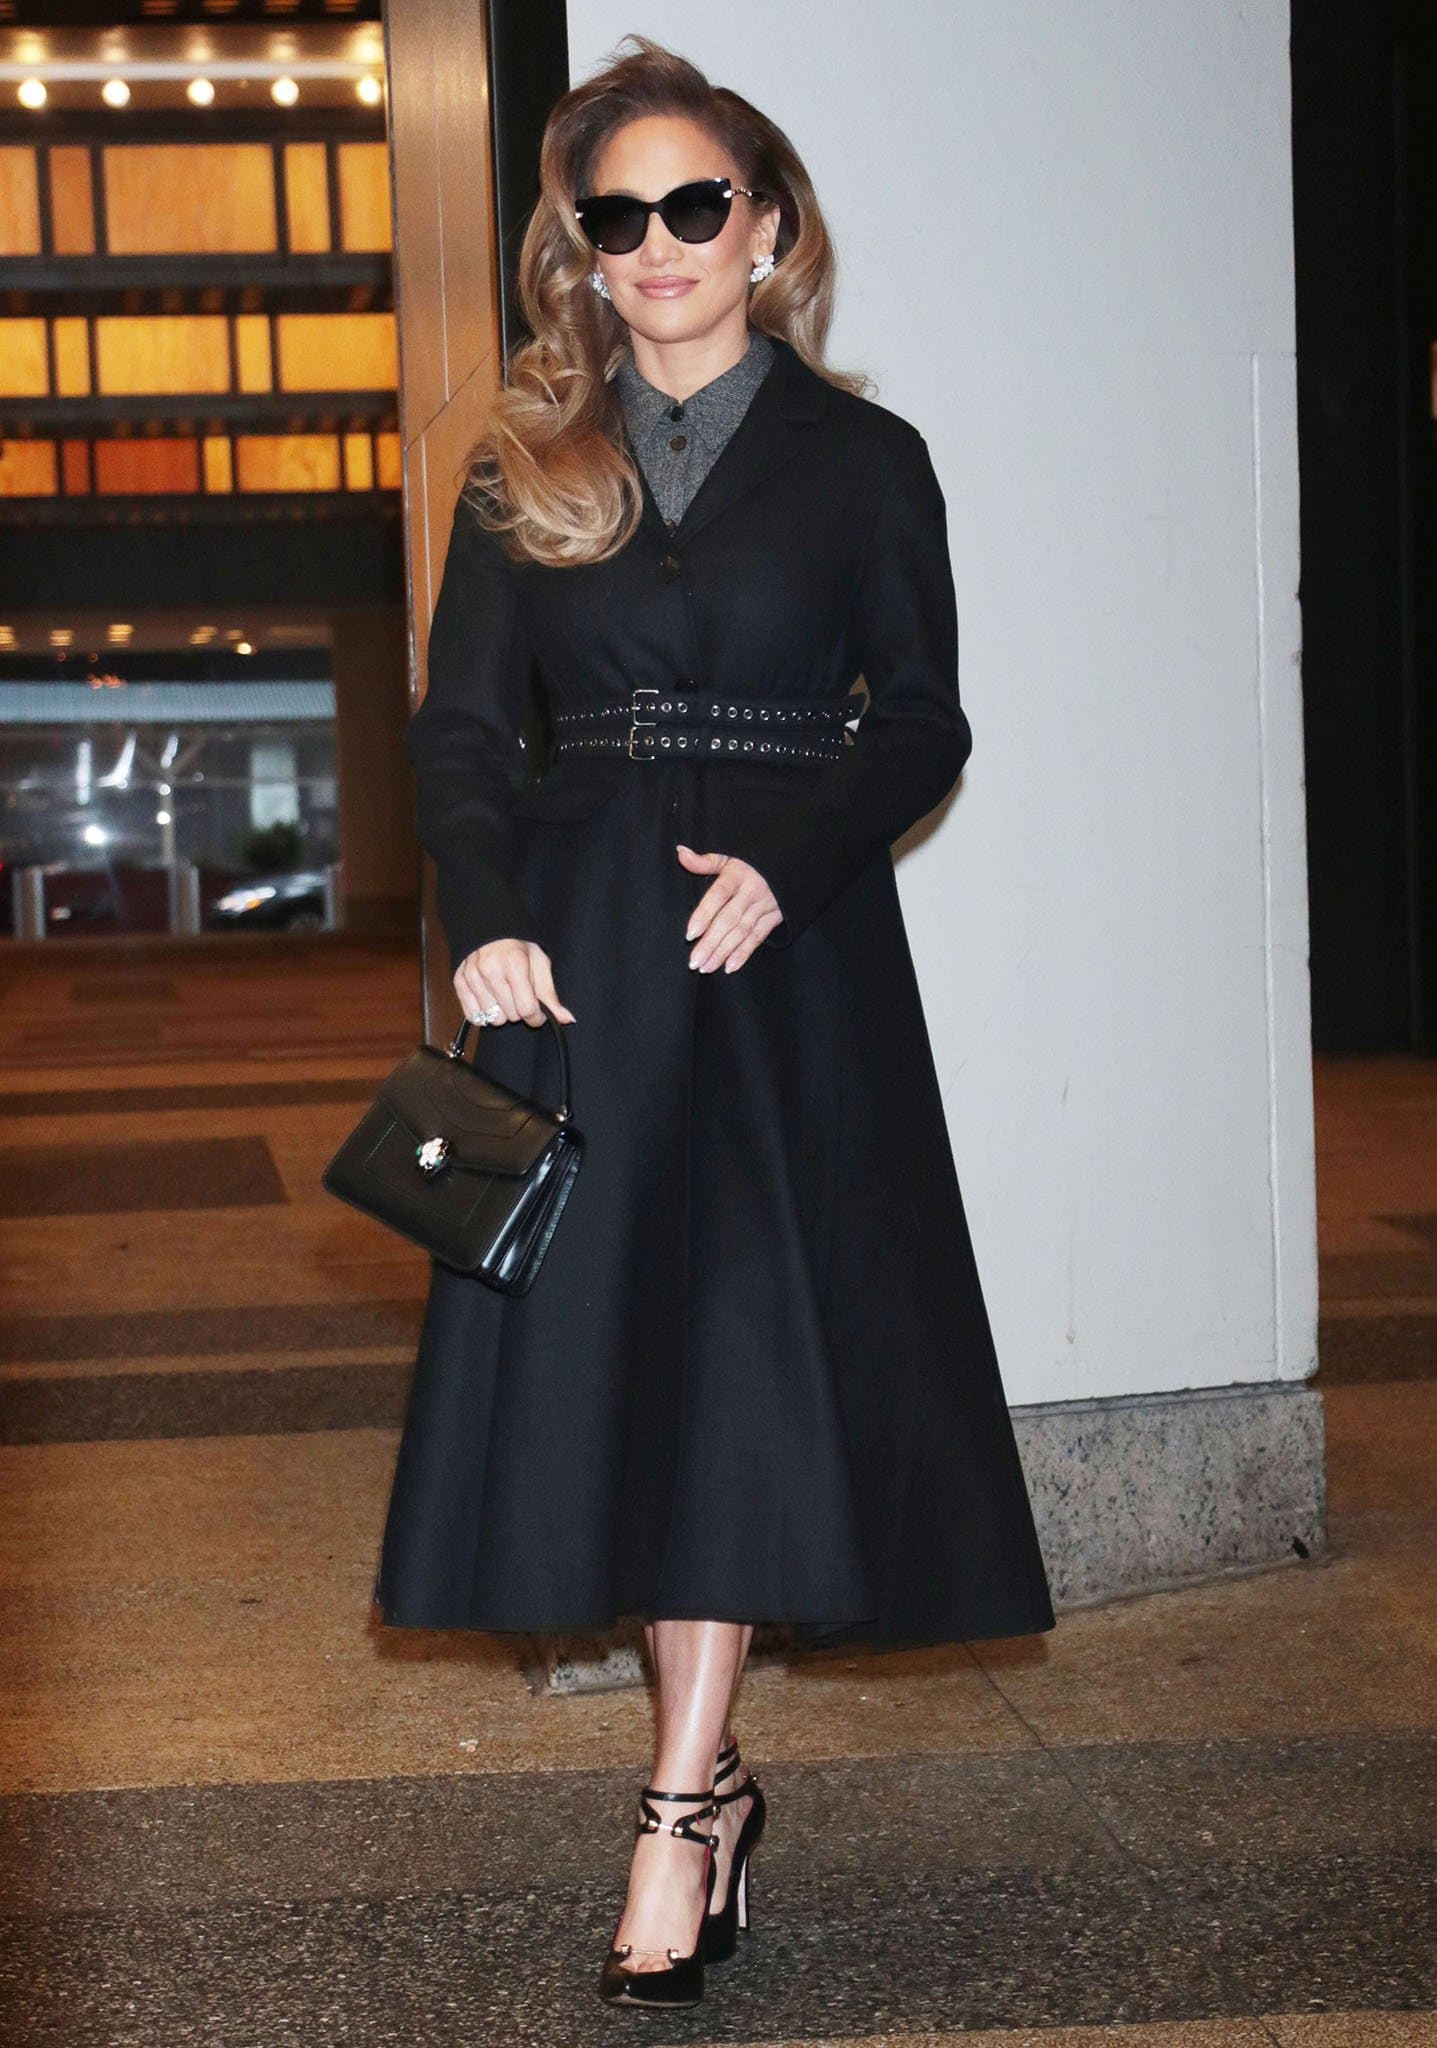 Jennifer Lopez looks sophisticated in Dior charcoal gray dress and A-line wool coat on February 4, 2022